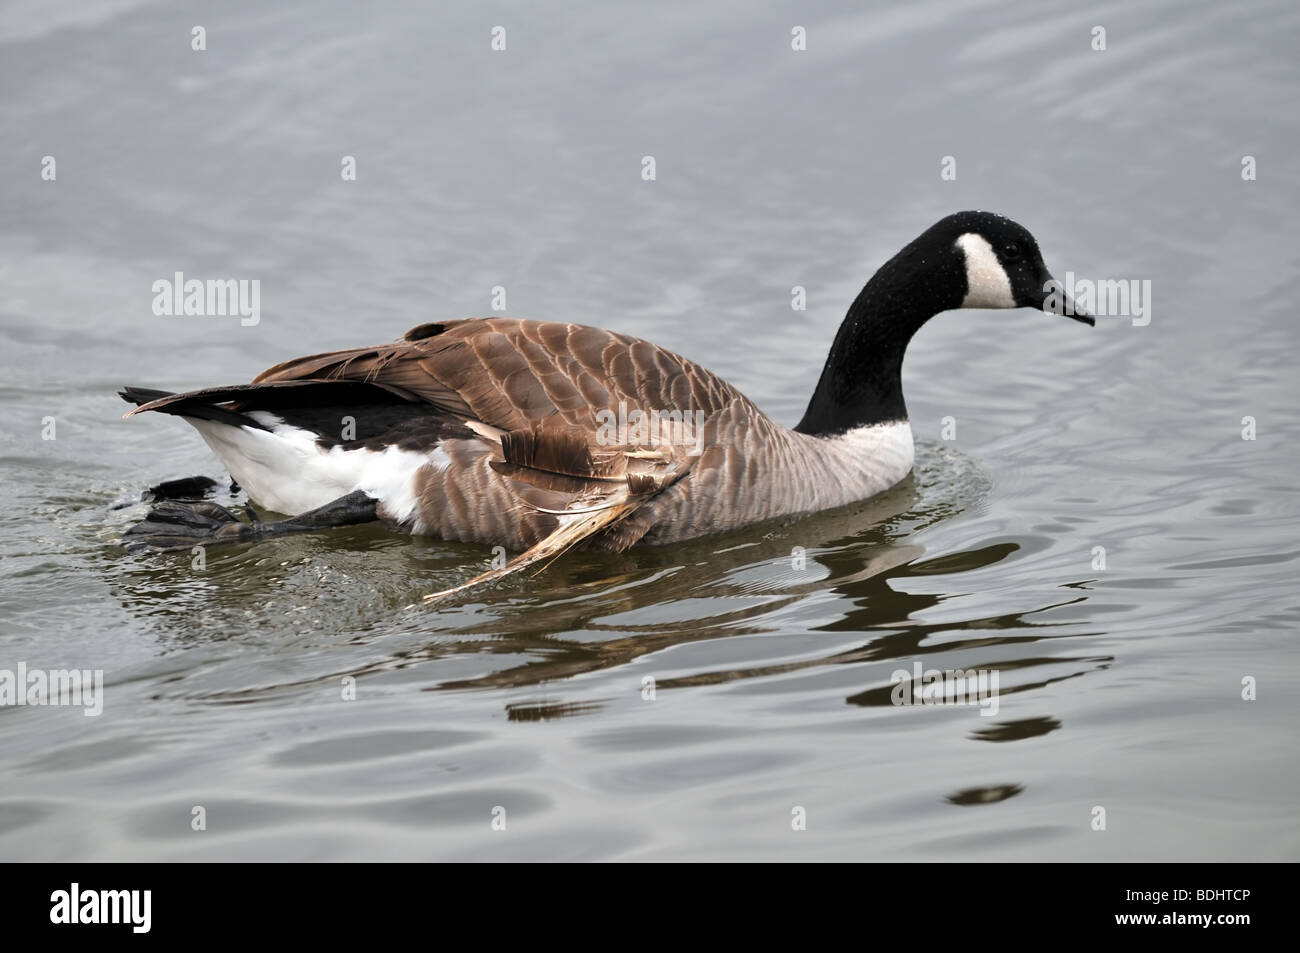 Canadian goose with injured wing swimming Stock Photo